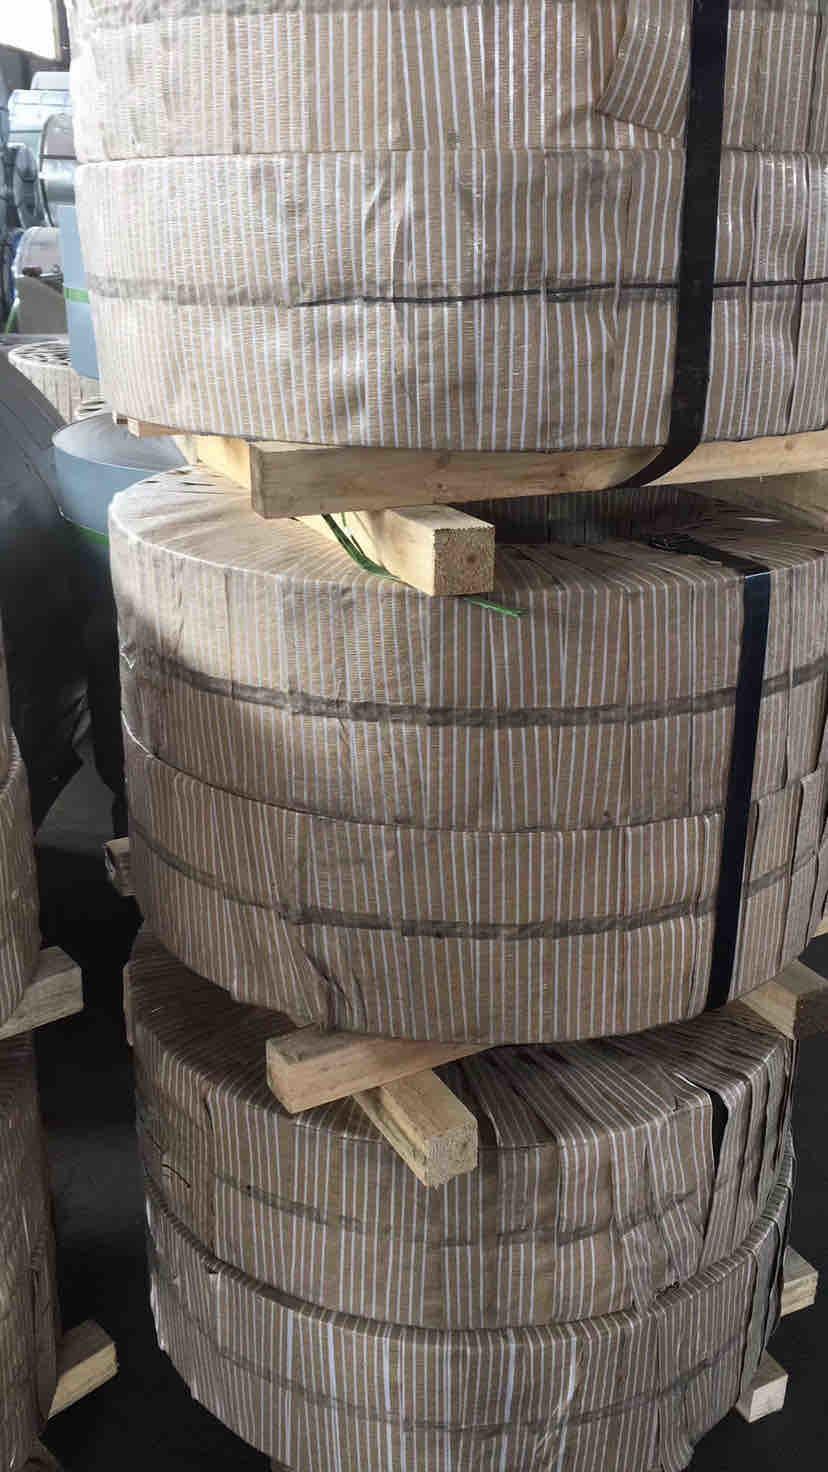 2mm Thickness 321H Stainless Steel Narrow Strip